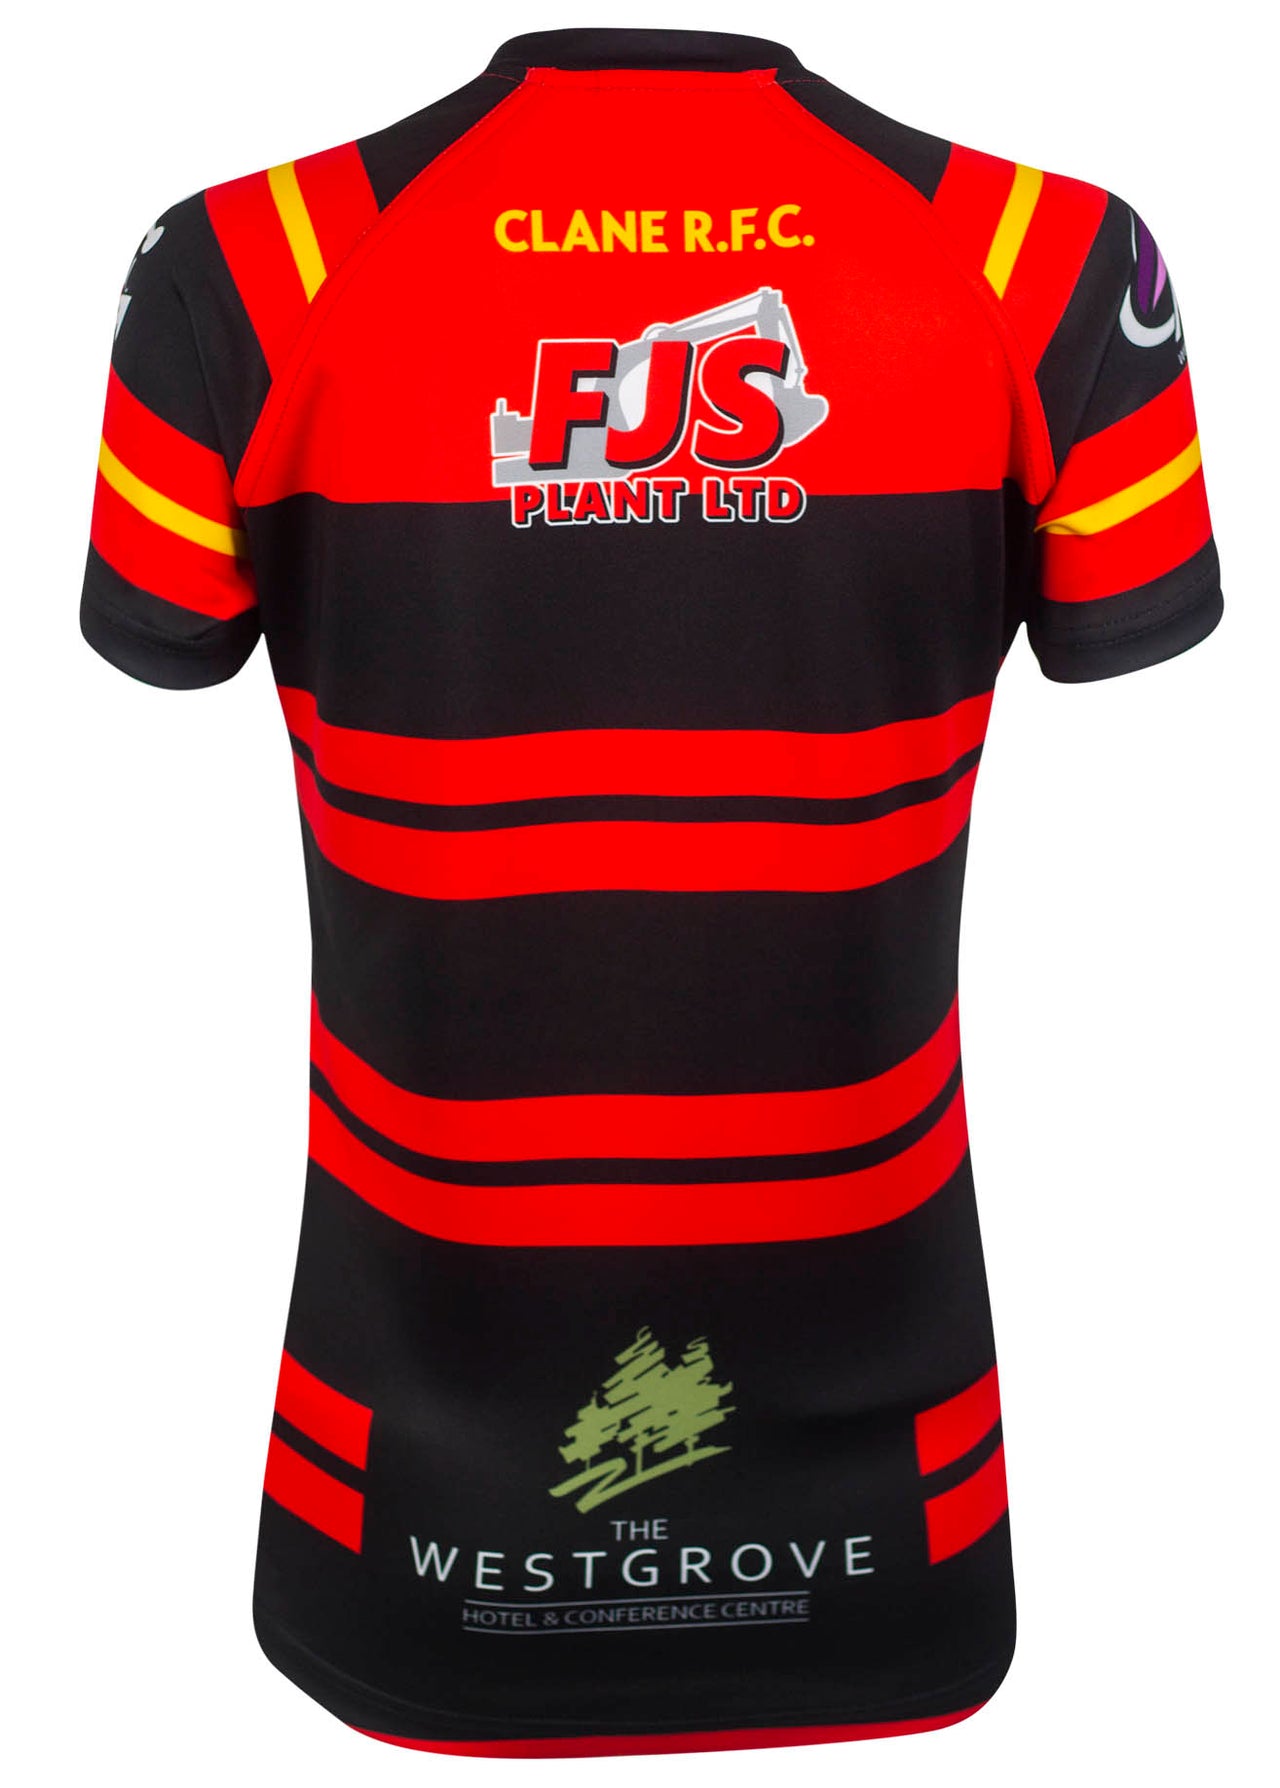 Clane Rugby Ladies Jersey Unisex Fit Adult